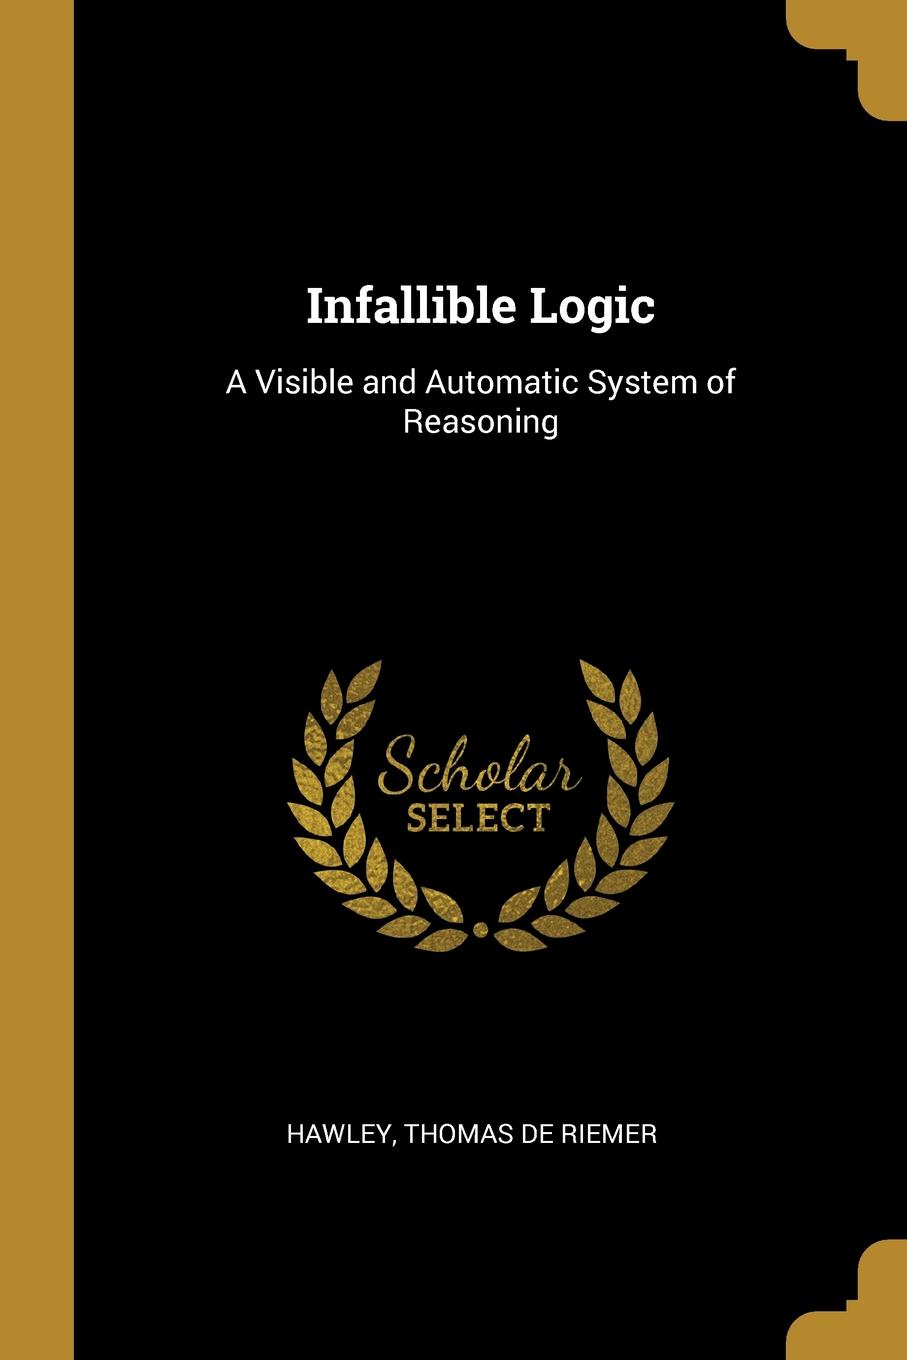 Infallible Logic. A Visible and Automatic System of Reasoning